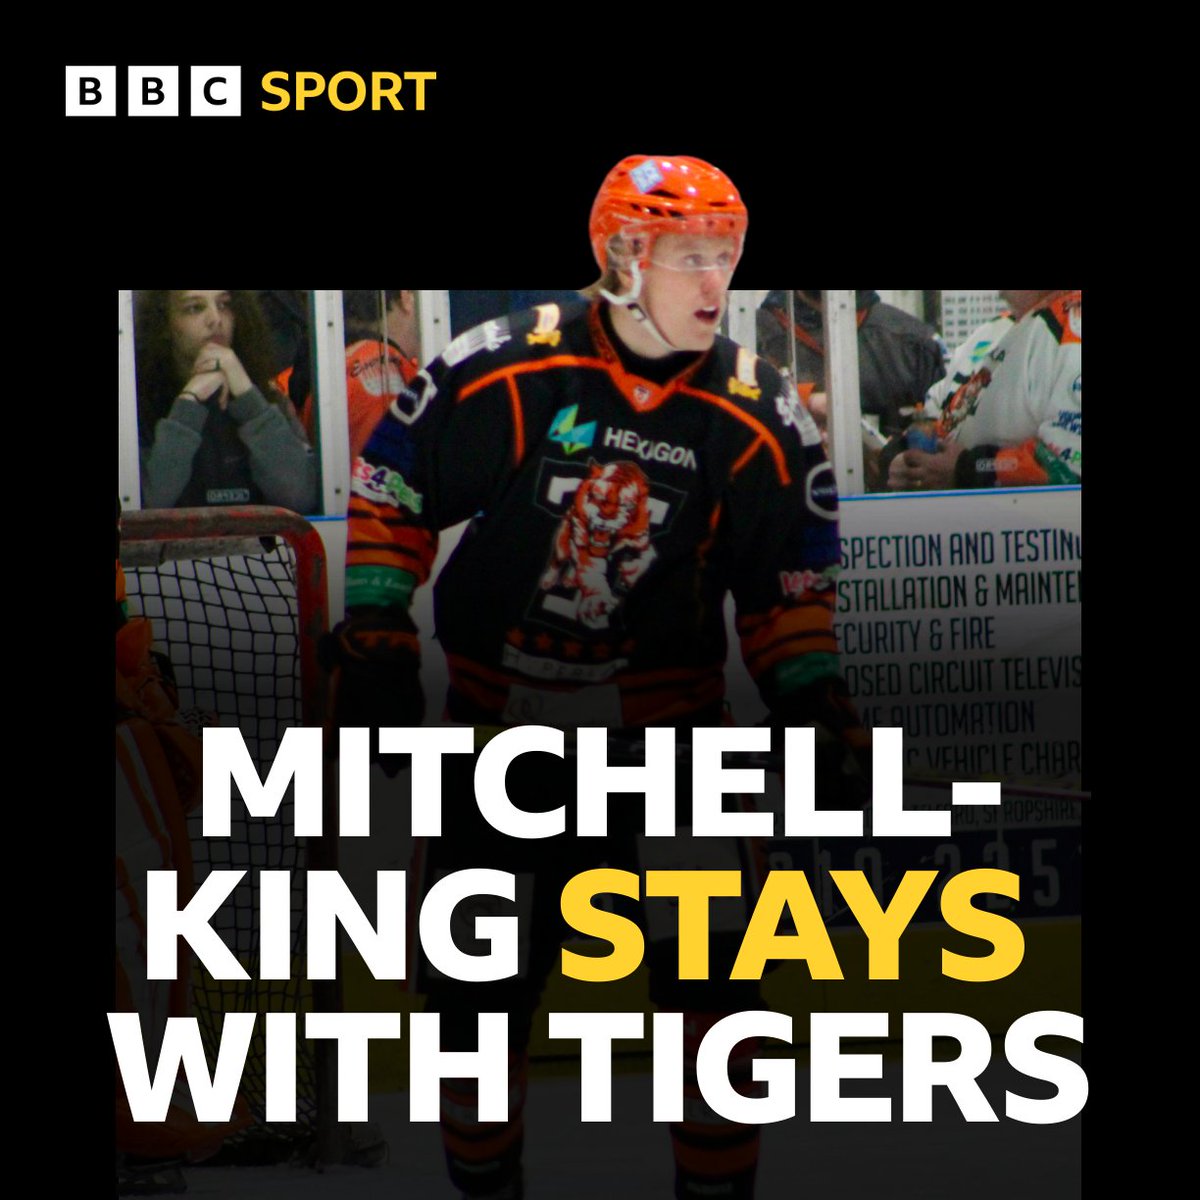 🐯 The Telford Tigers have announced defender Rhodes Mitchell-King has signed a two year contract. 🏒 Rhodes re-joins the club off the back of his best season at senior level last season, scoring 34 points. #BBCIceHockey